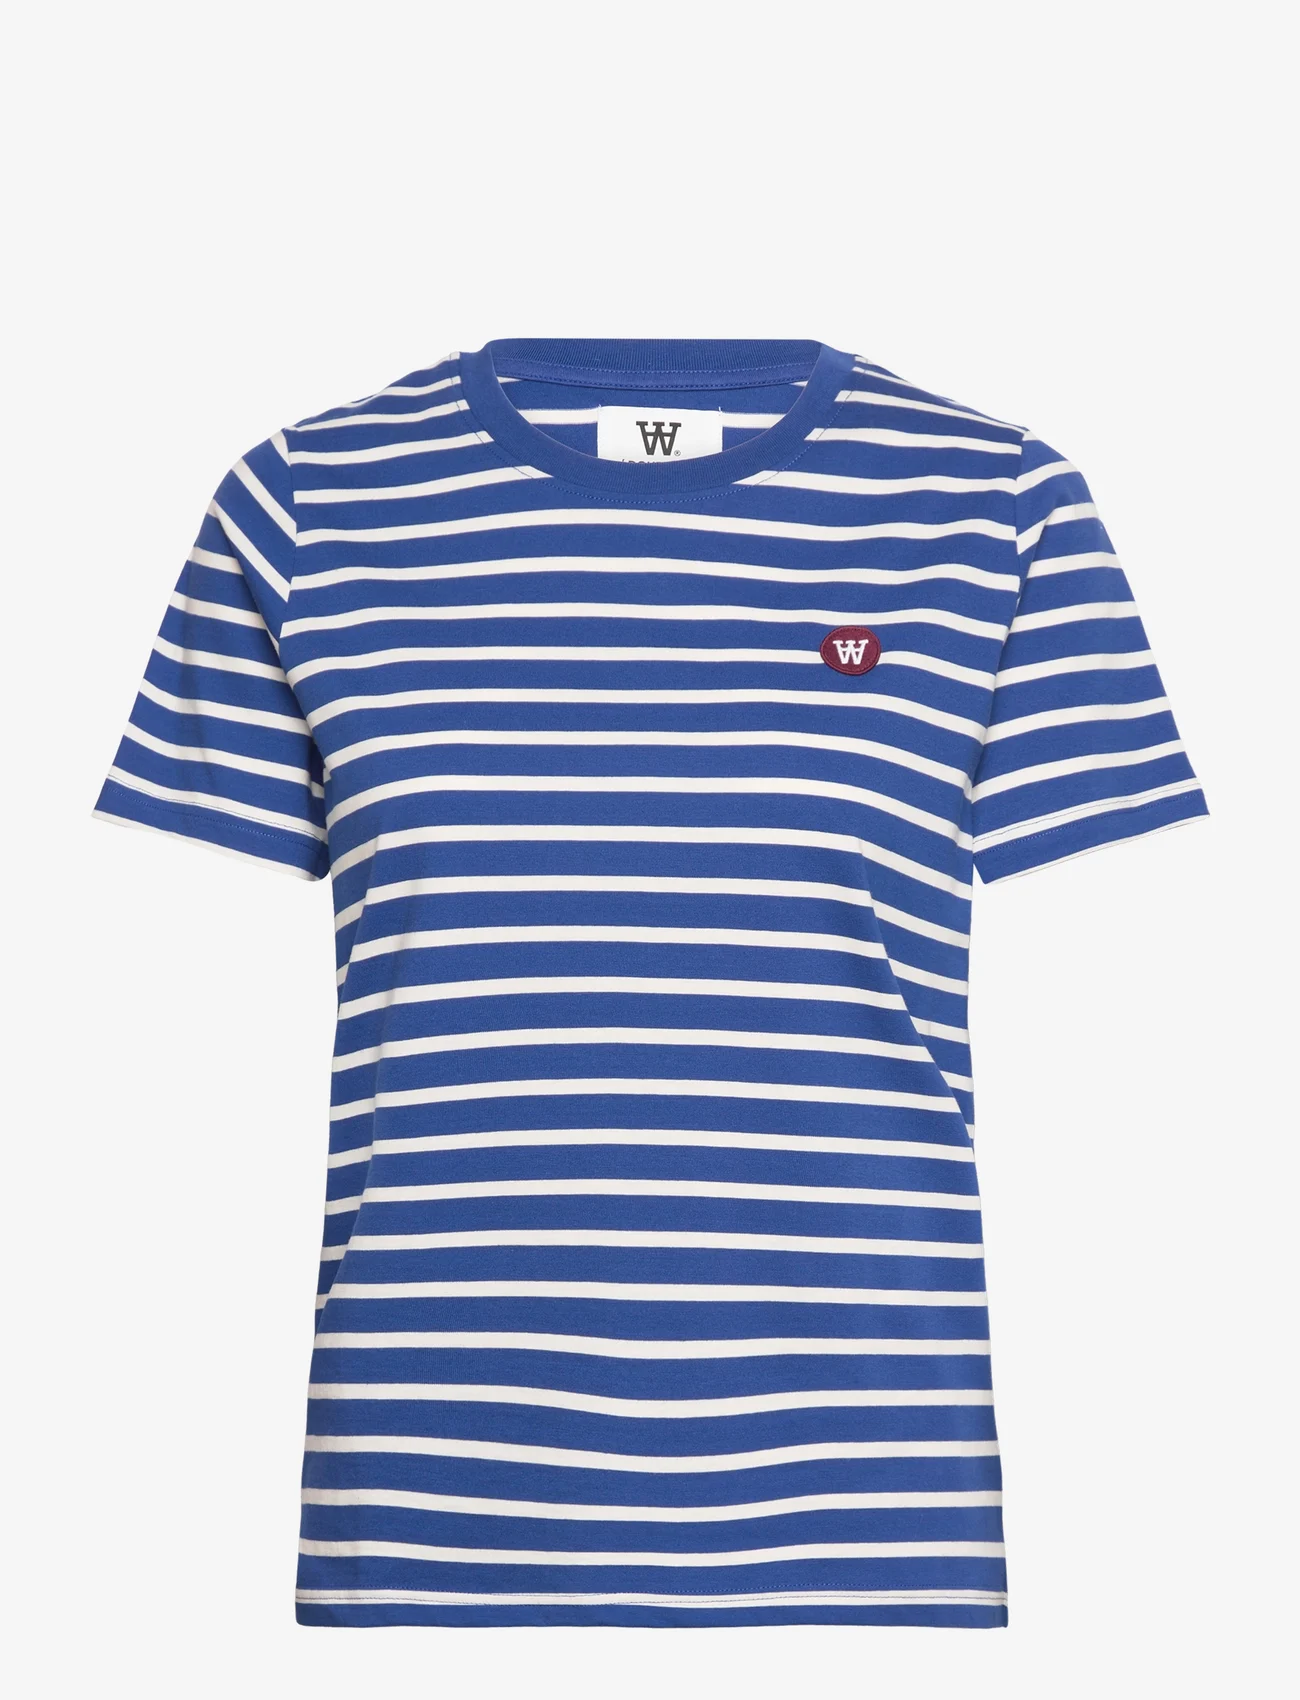 Double A by Wood Wood - Mia T-shirt - t-shirts - limoges striped - 0